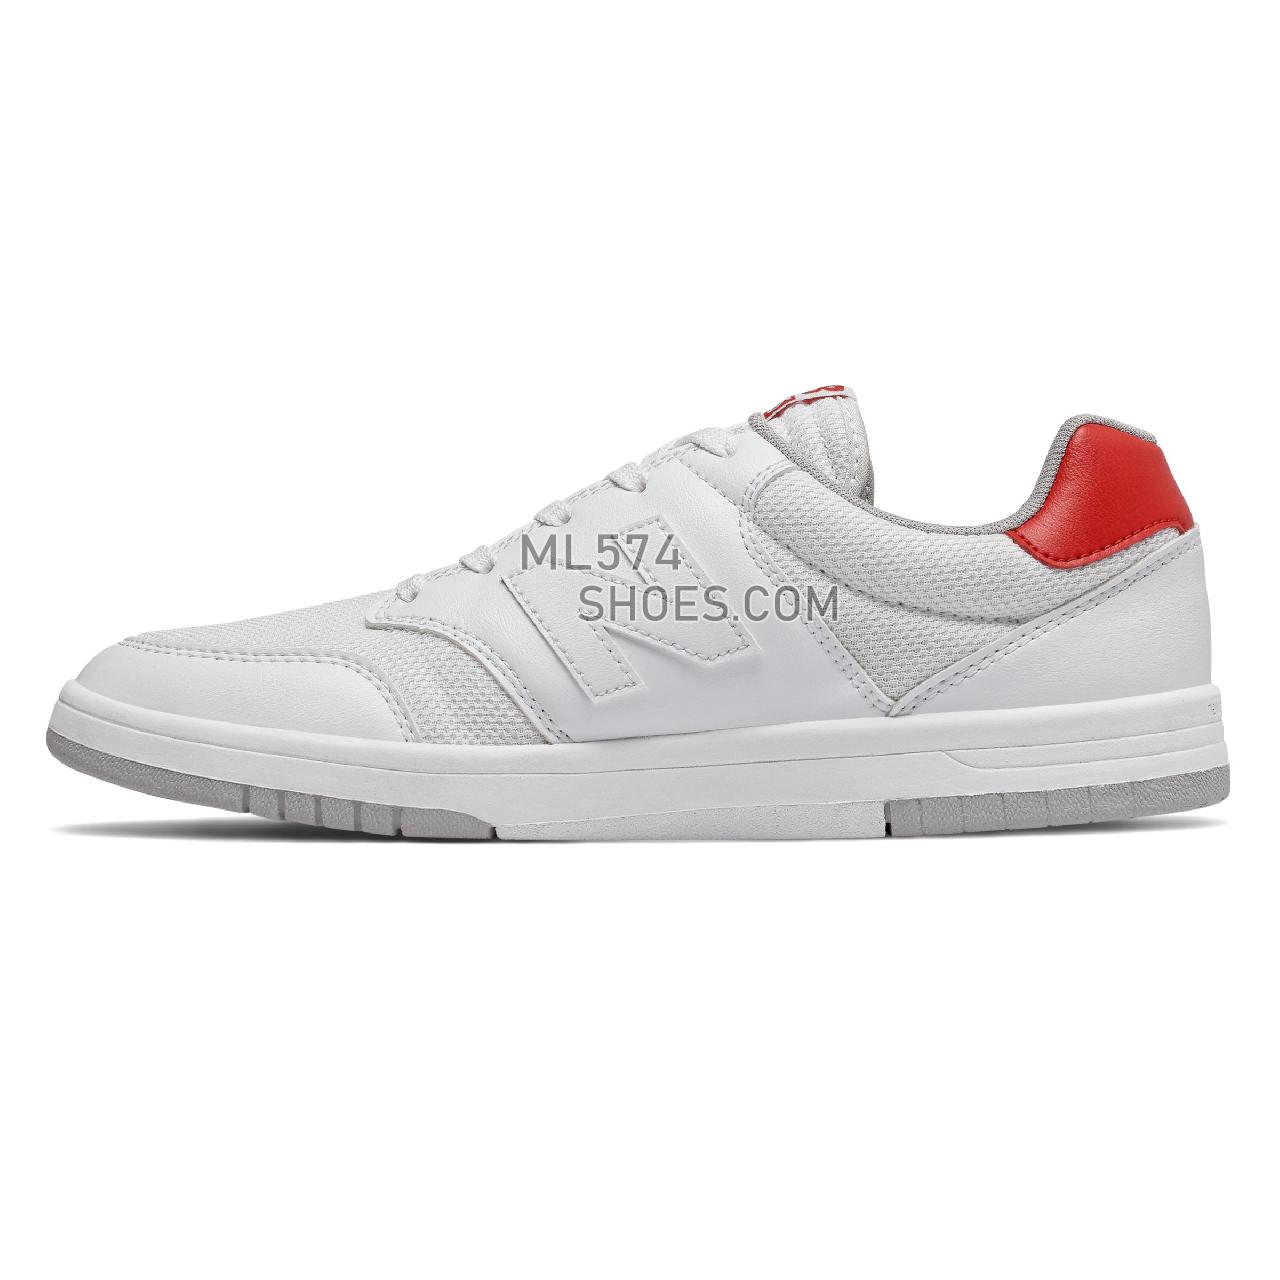 New Balance All Coasts 425 - Men's Court Classics - White with Red - AM425WHT